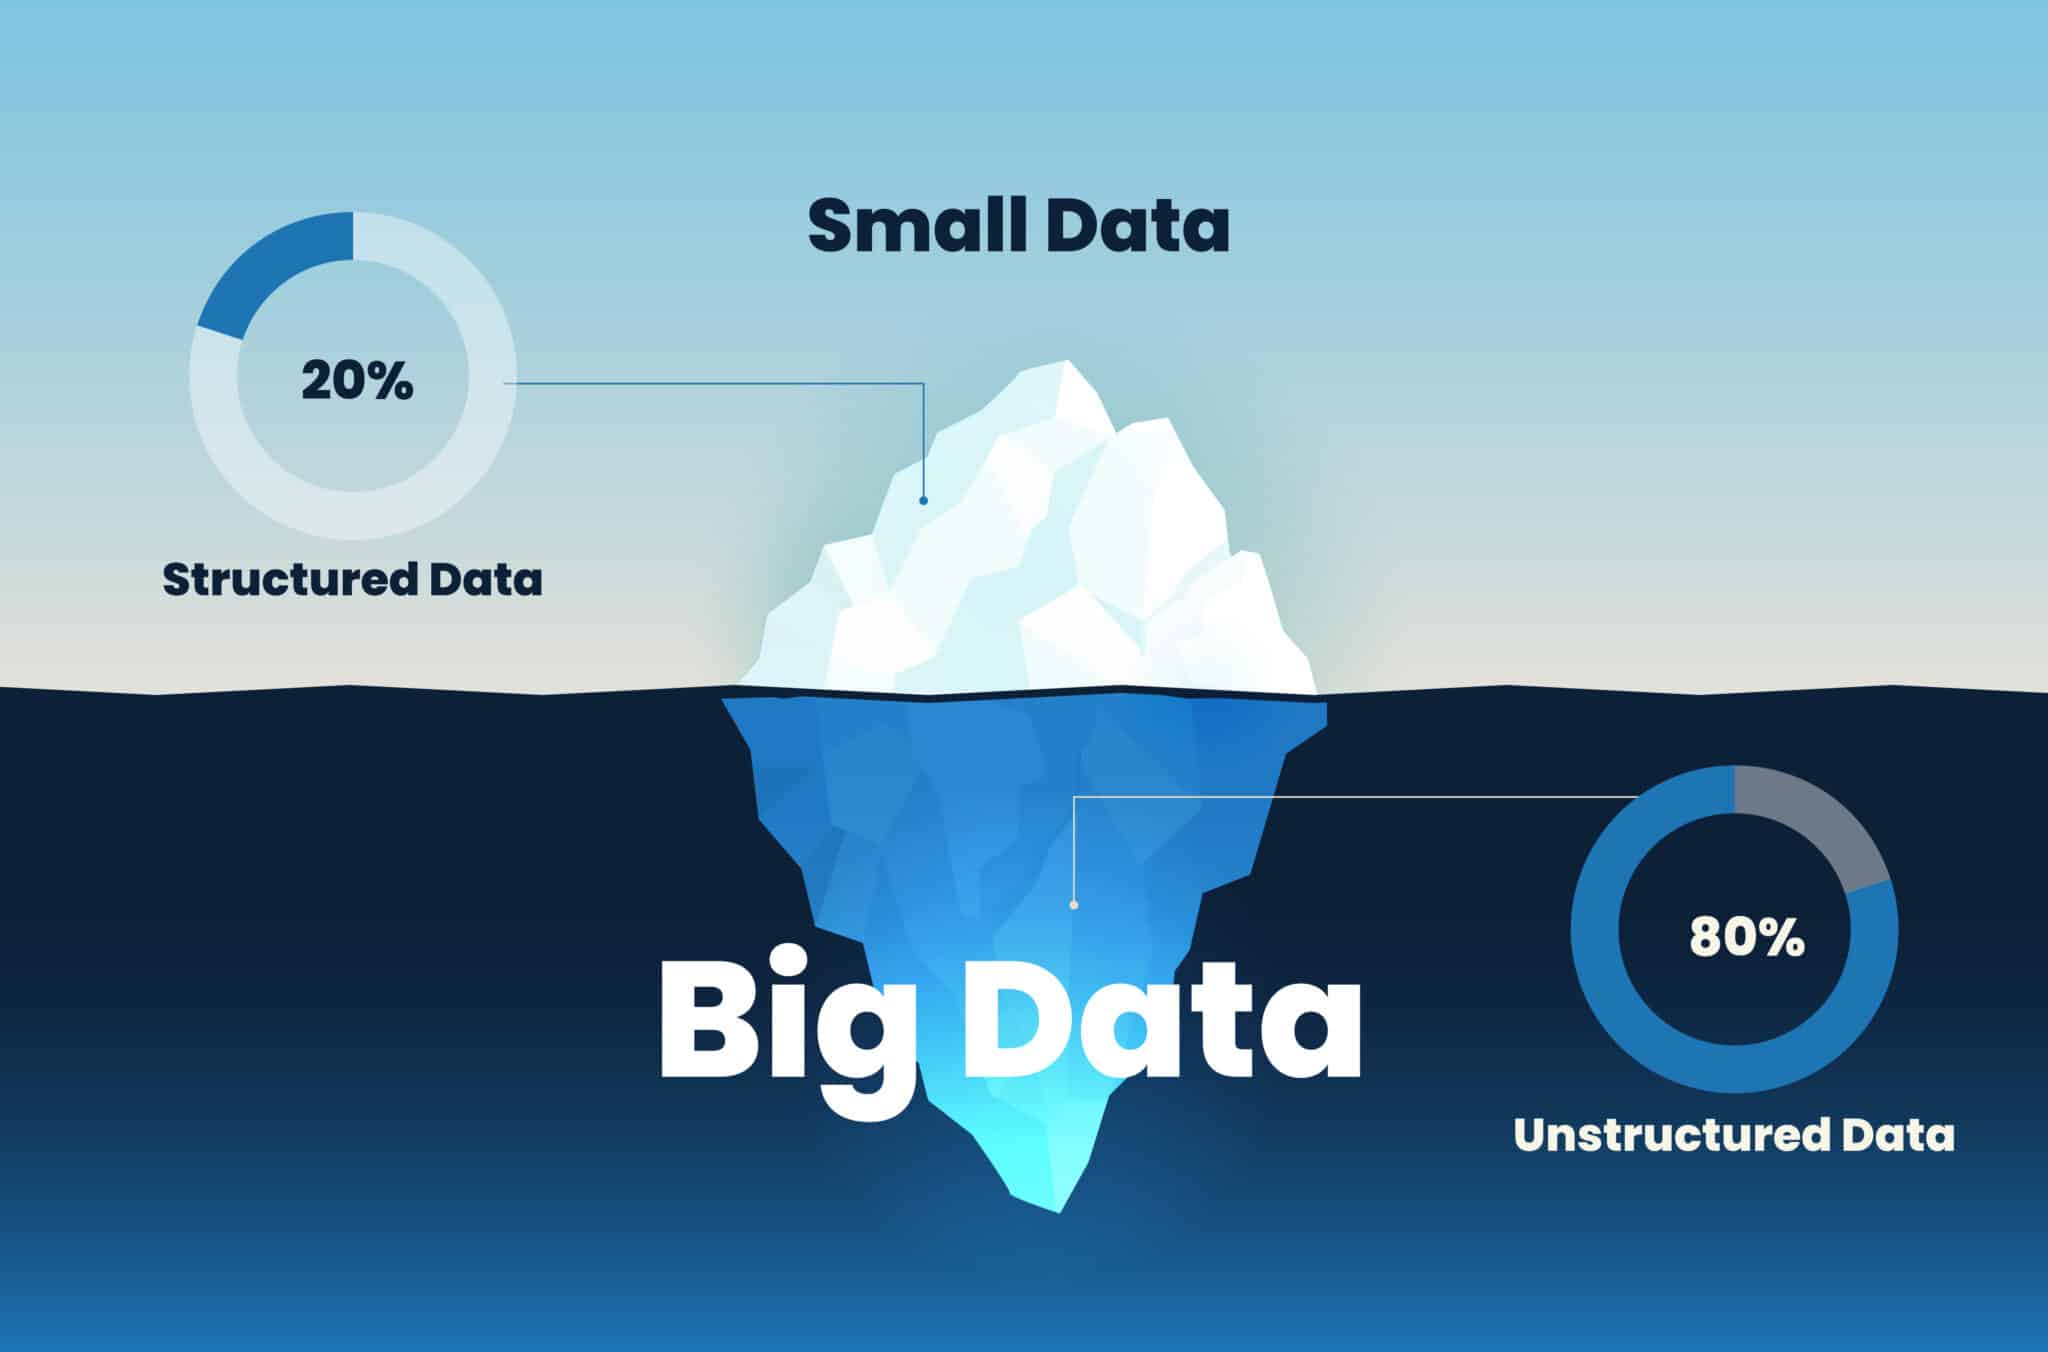 Clinical data iceberg infographic: 20% structured data visible, 80% unstructured data submerged.